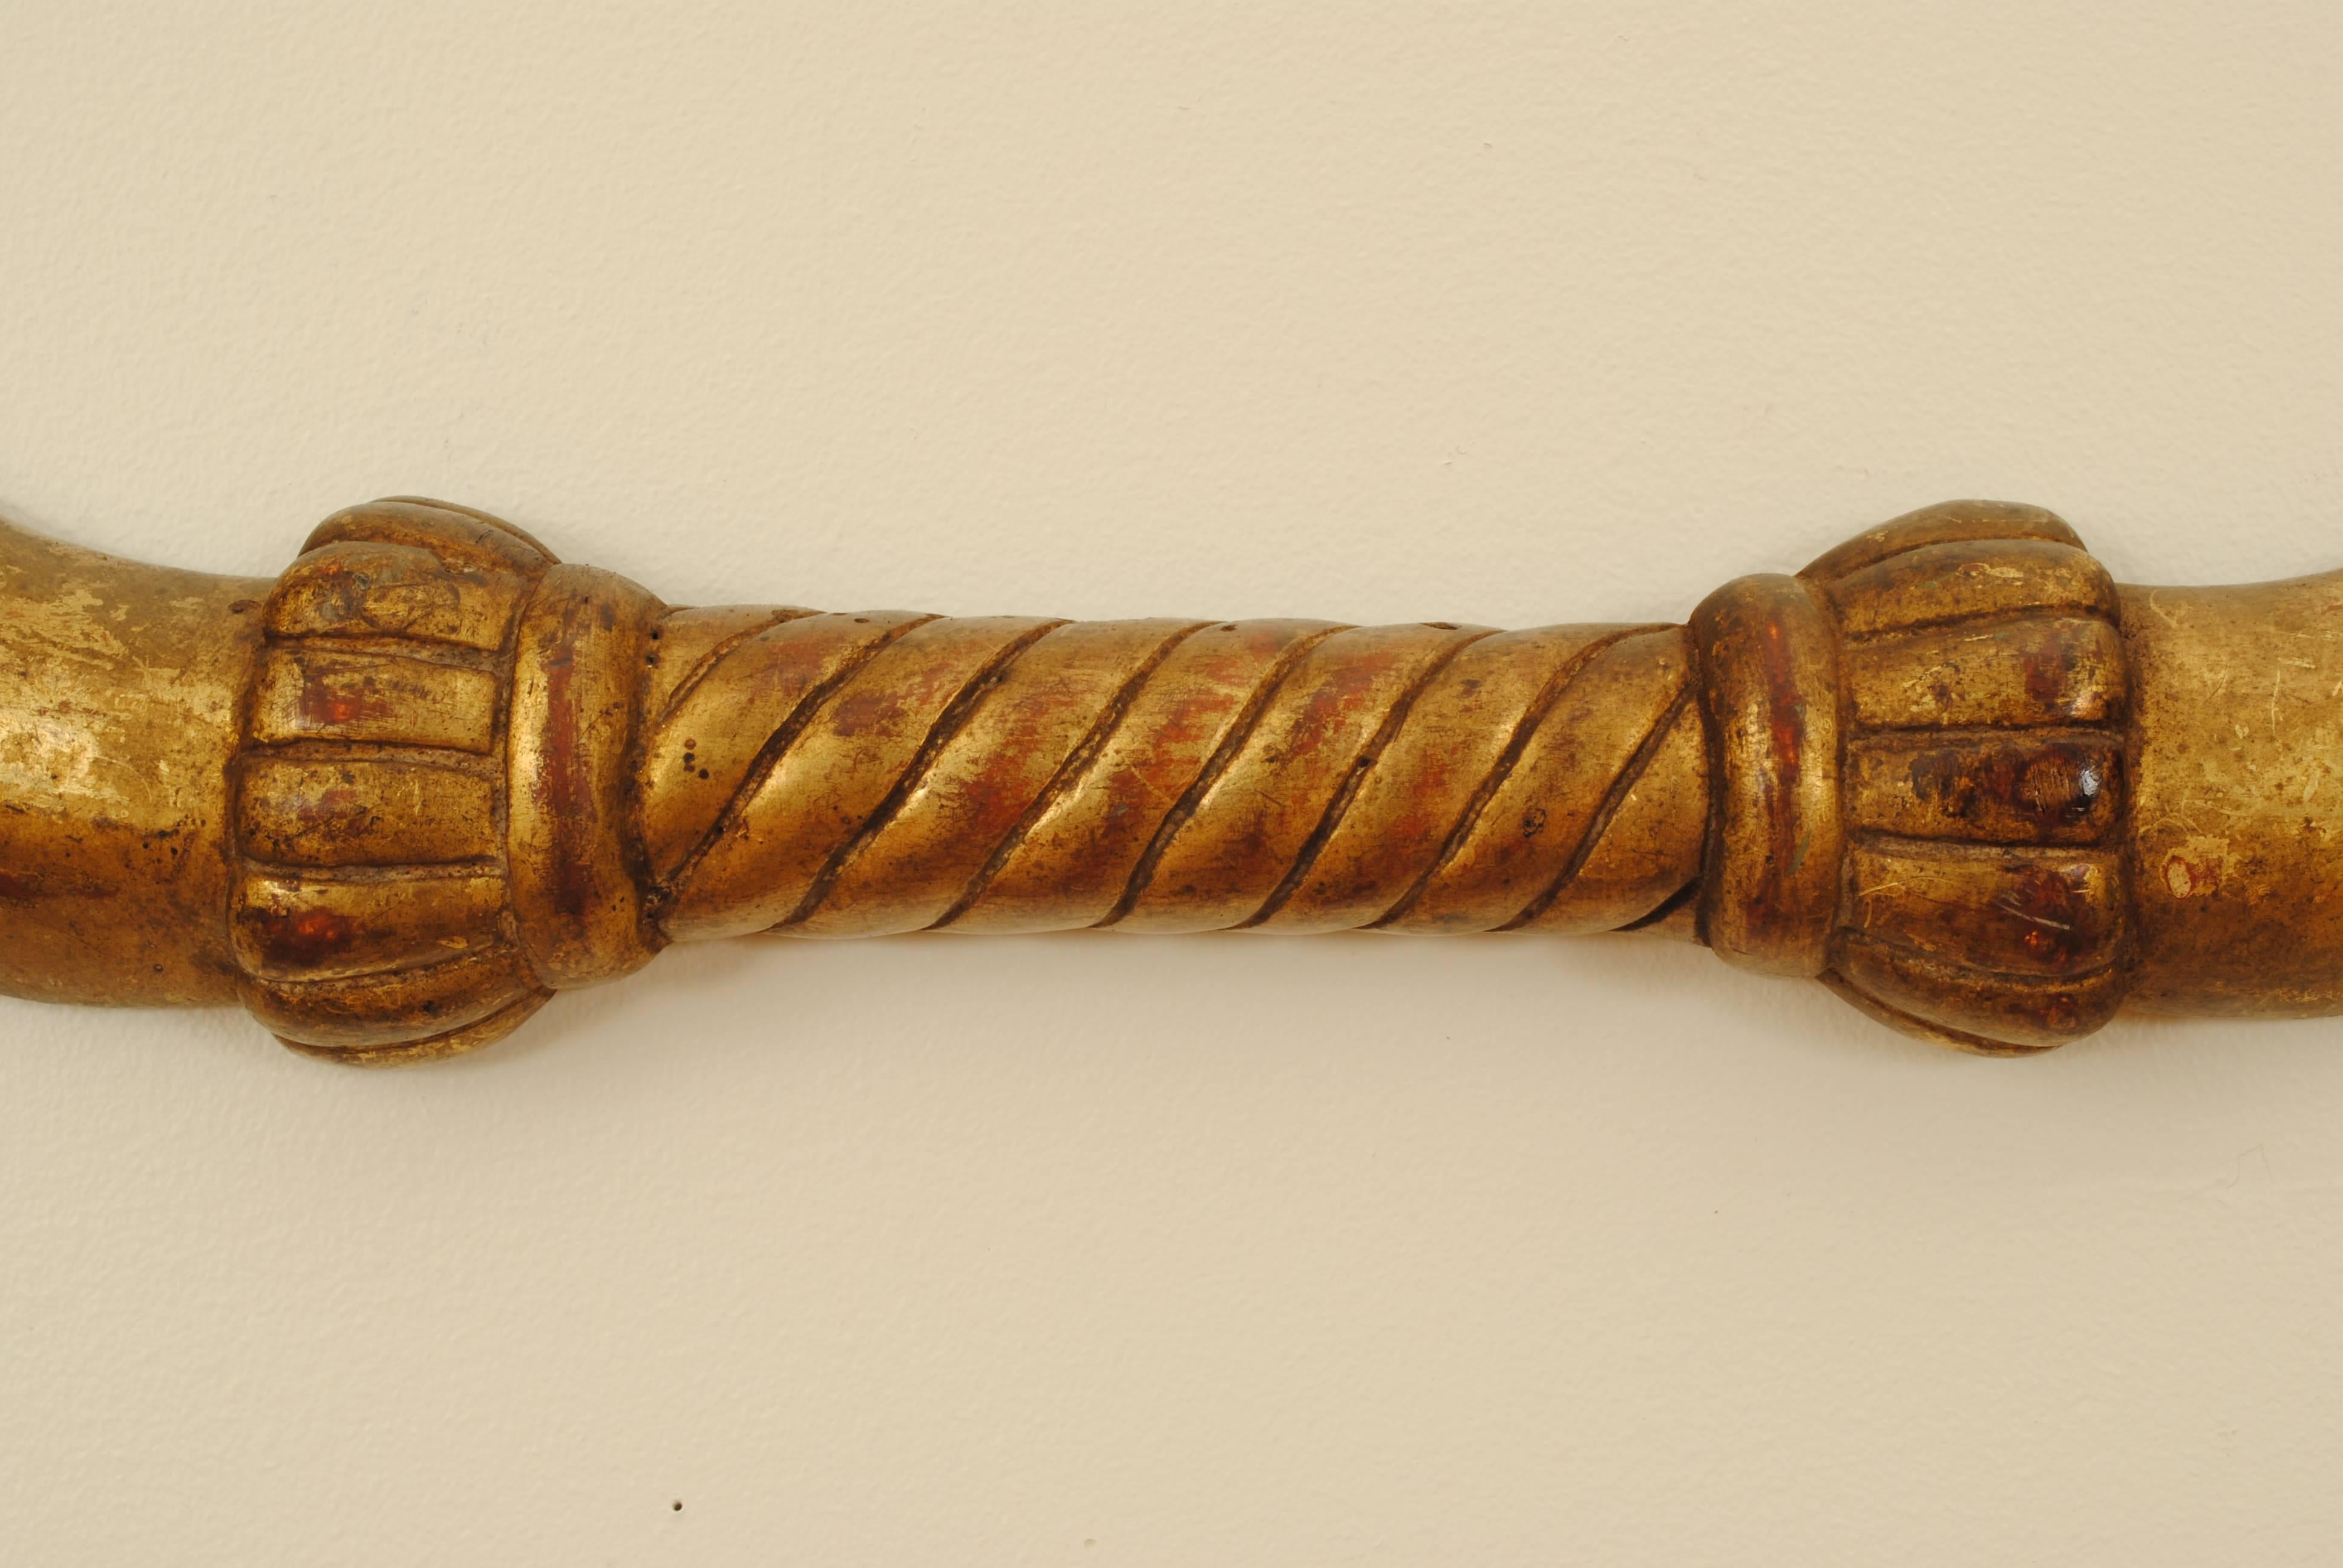 in the shape of a bow with a detailed center grip and swans heads on the ends, the reverse side flat and meant to hang on a wall